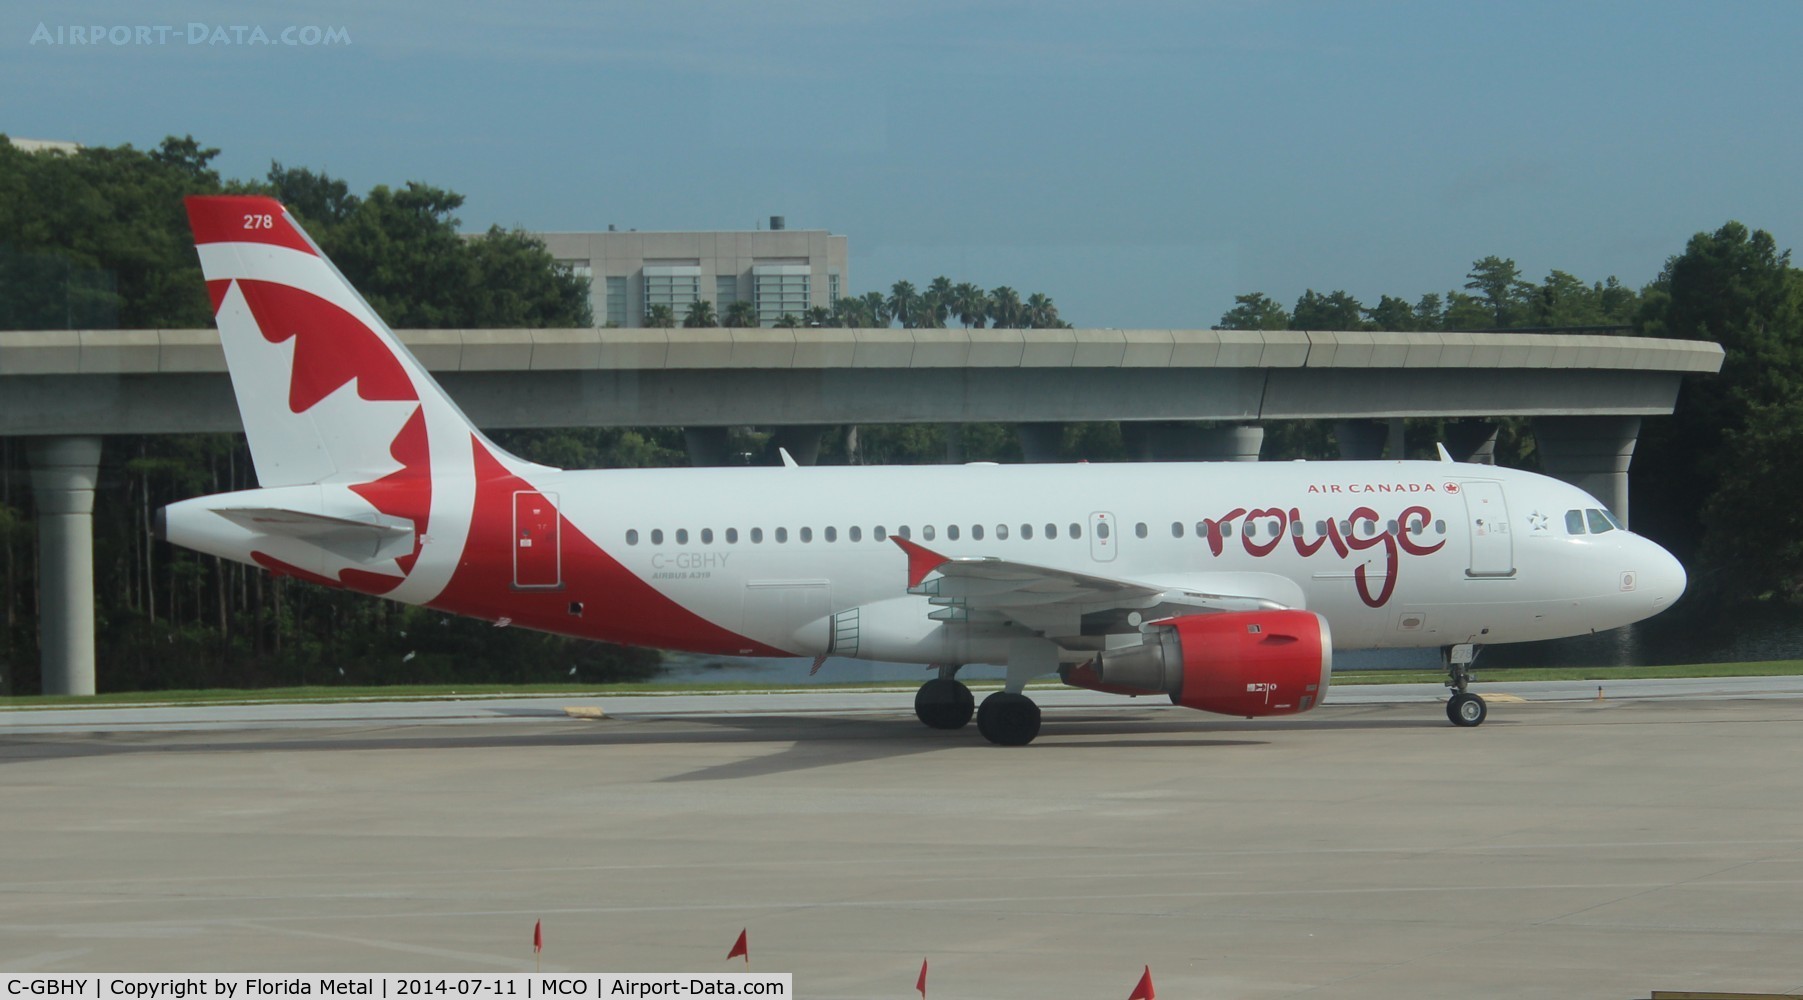 C-GBHY, 1998 Airbus A319-114 C/N 800, Air Canada Rouge